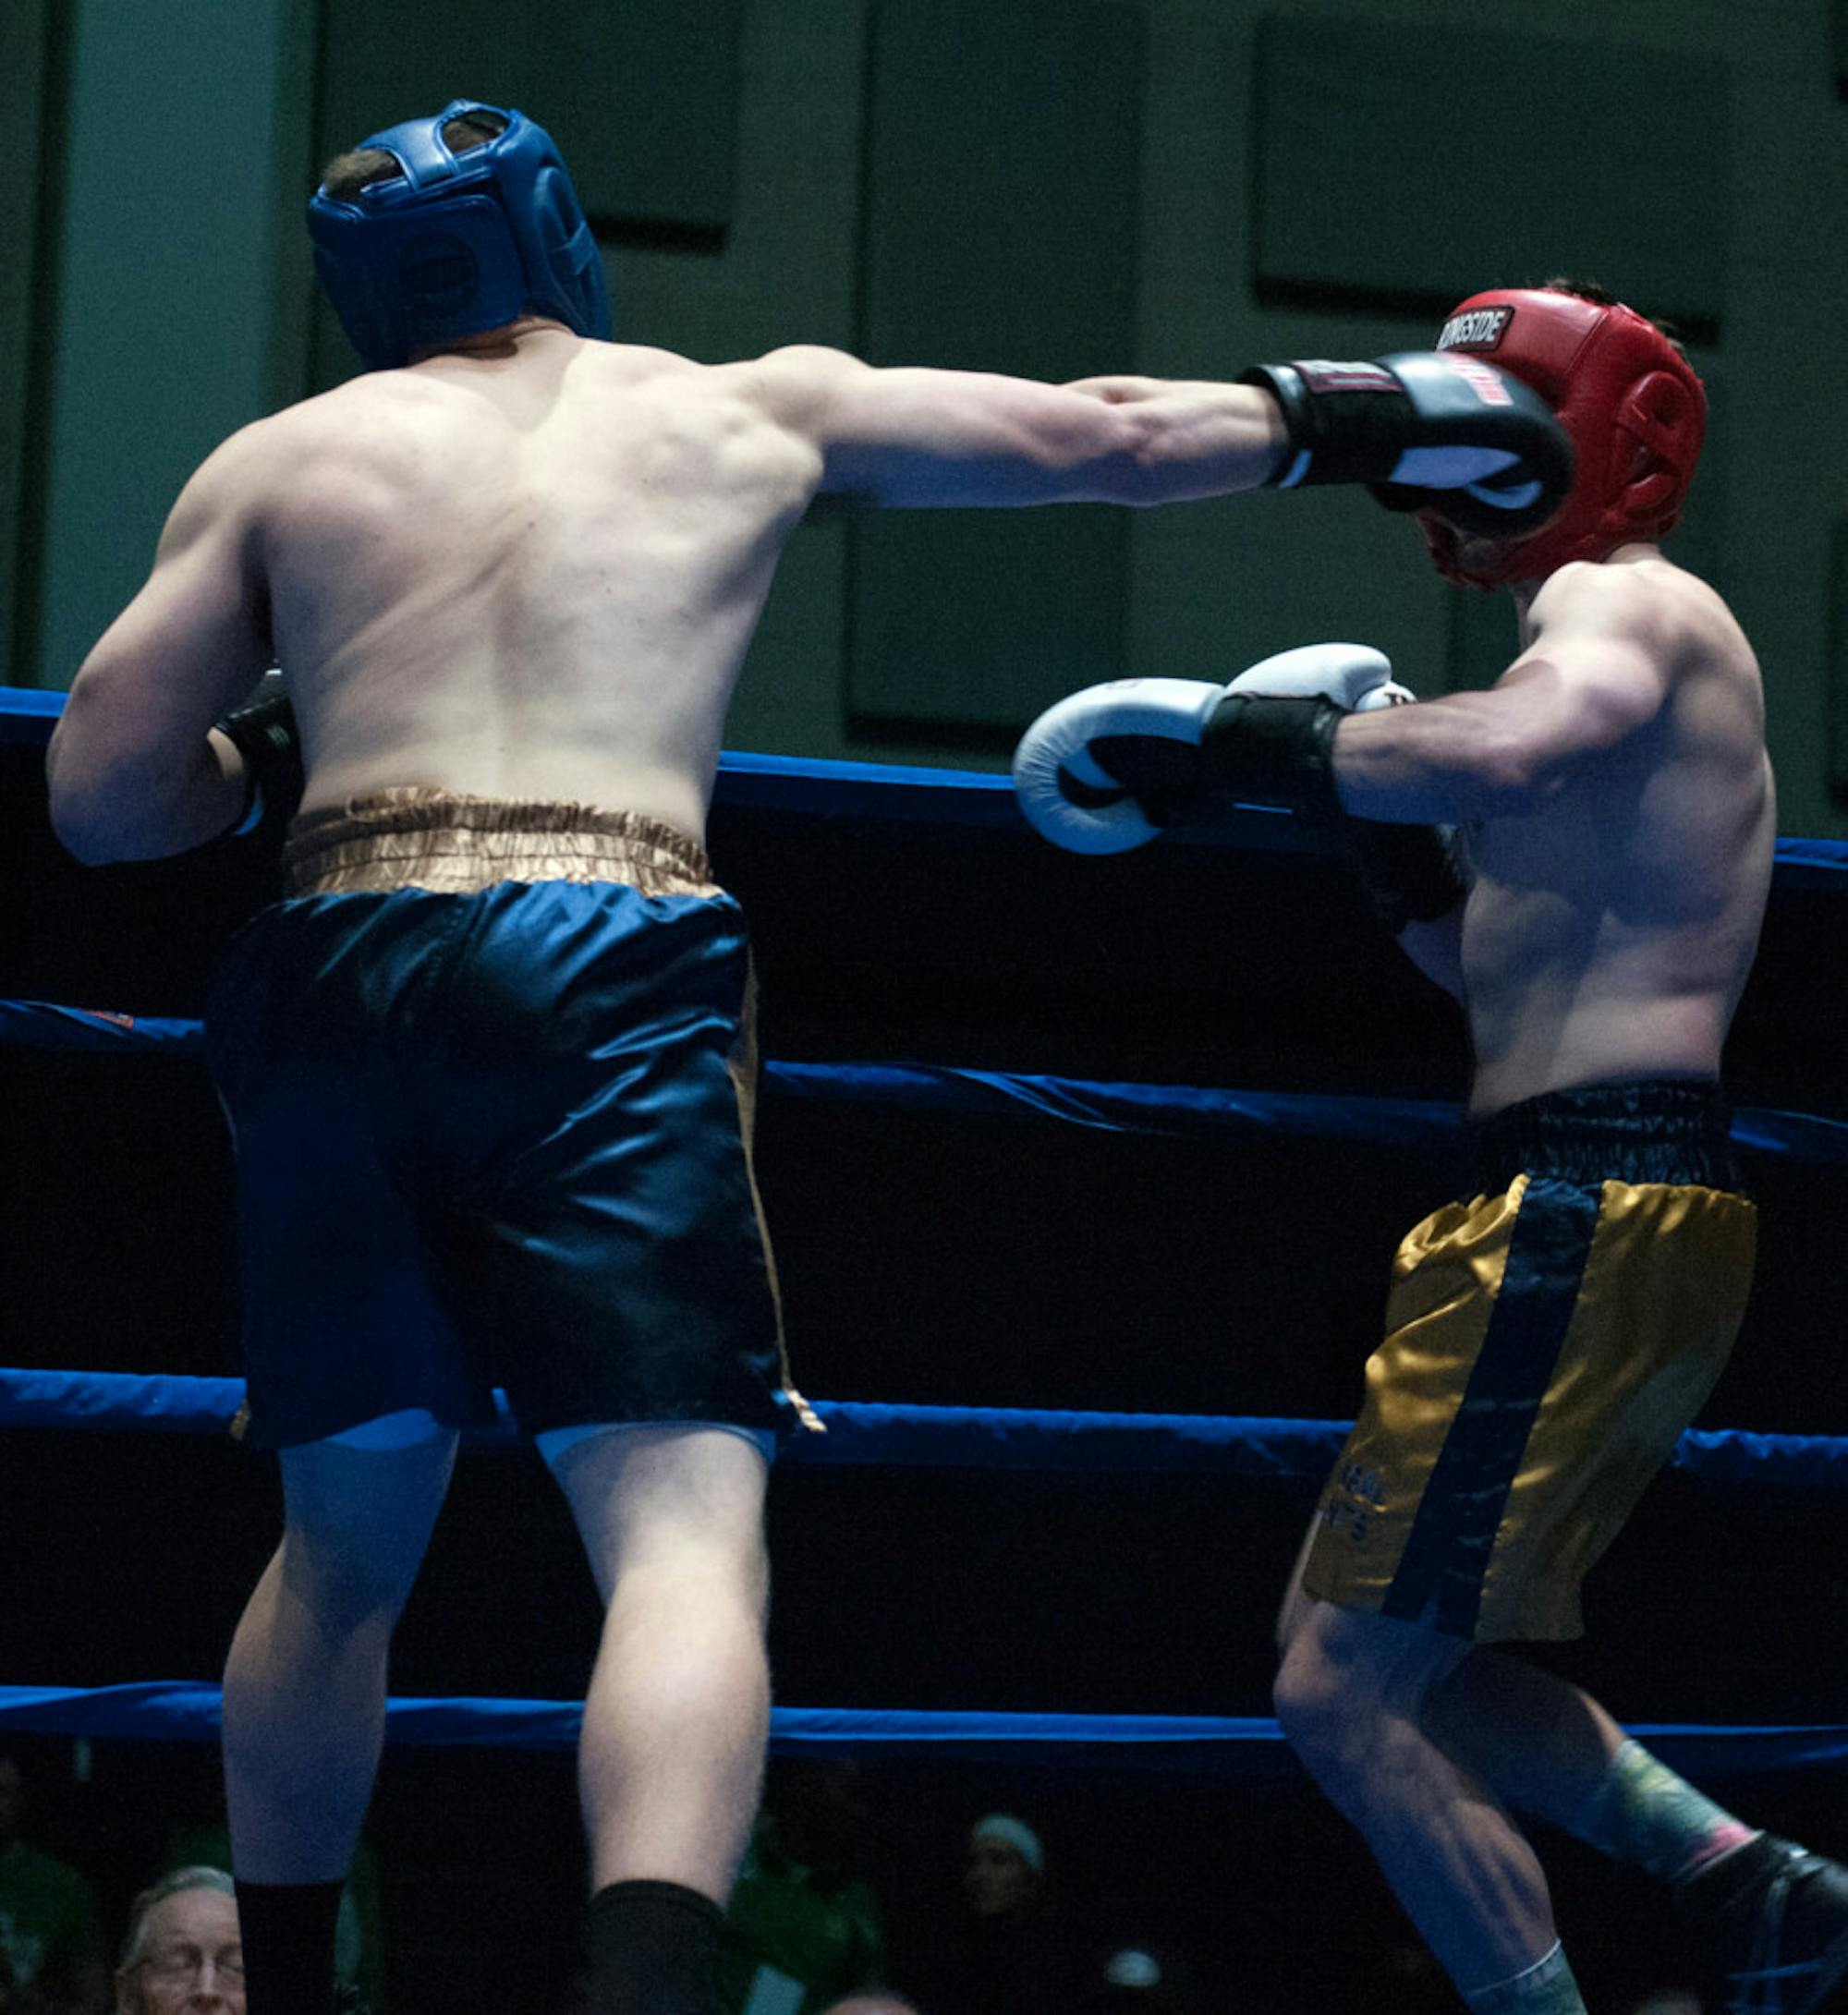 Senior Bengal Bouts captain Bryan Cooley, left, throws a jab during his semifinal victory over graduate student C.J. Pruner on Tuesday at Joyce Fieldhouse. Cooley fights for the 184-pound title tonight.